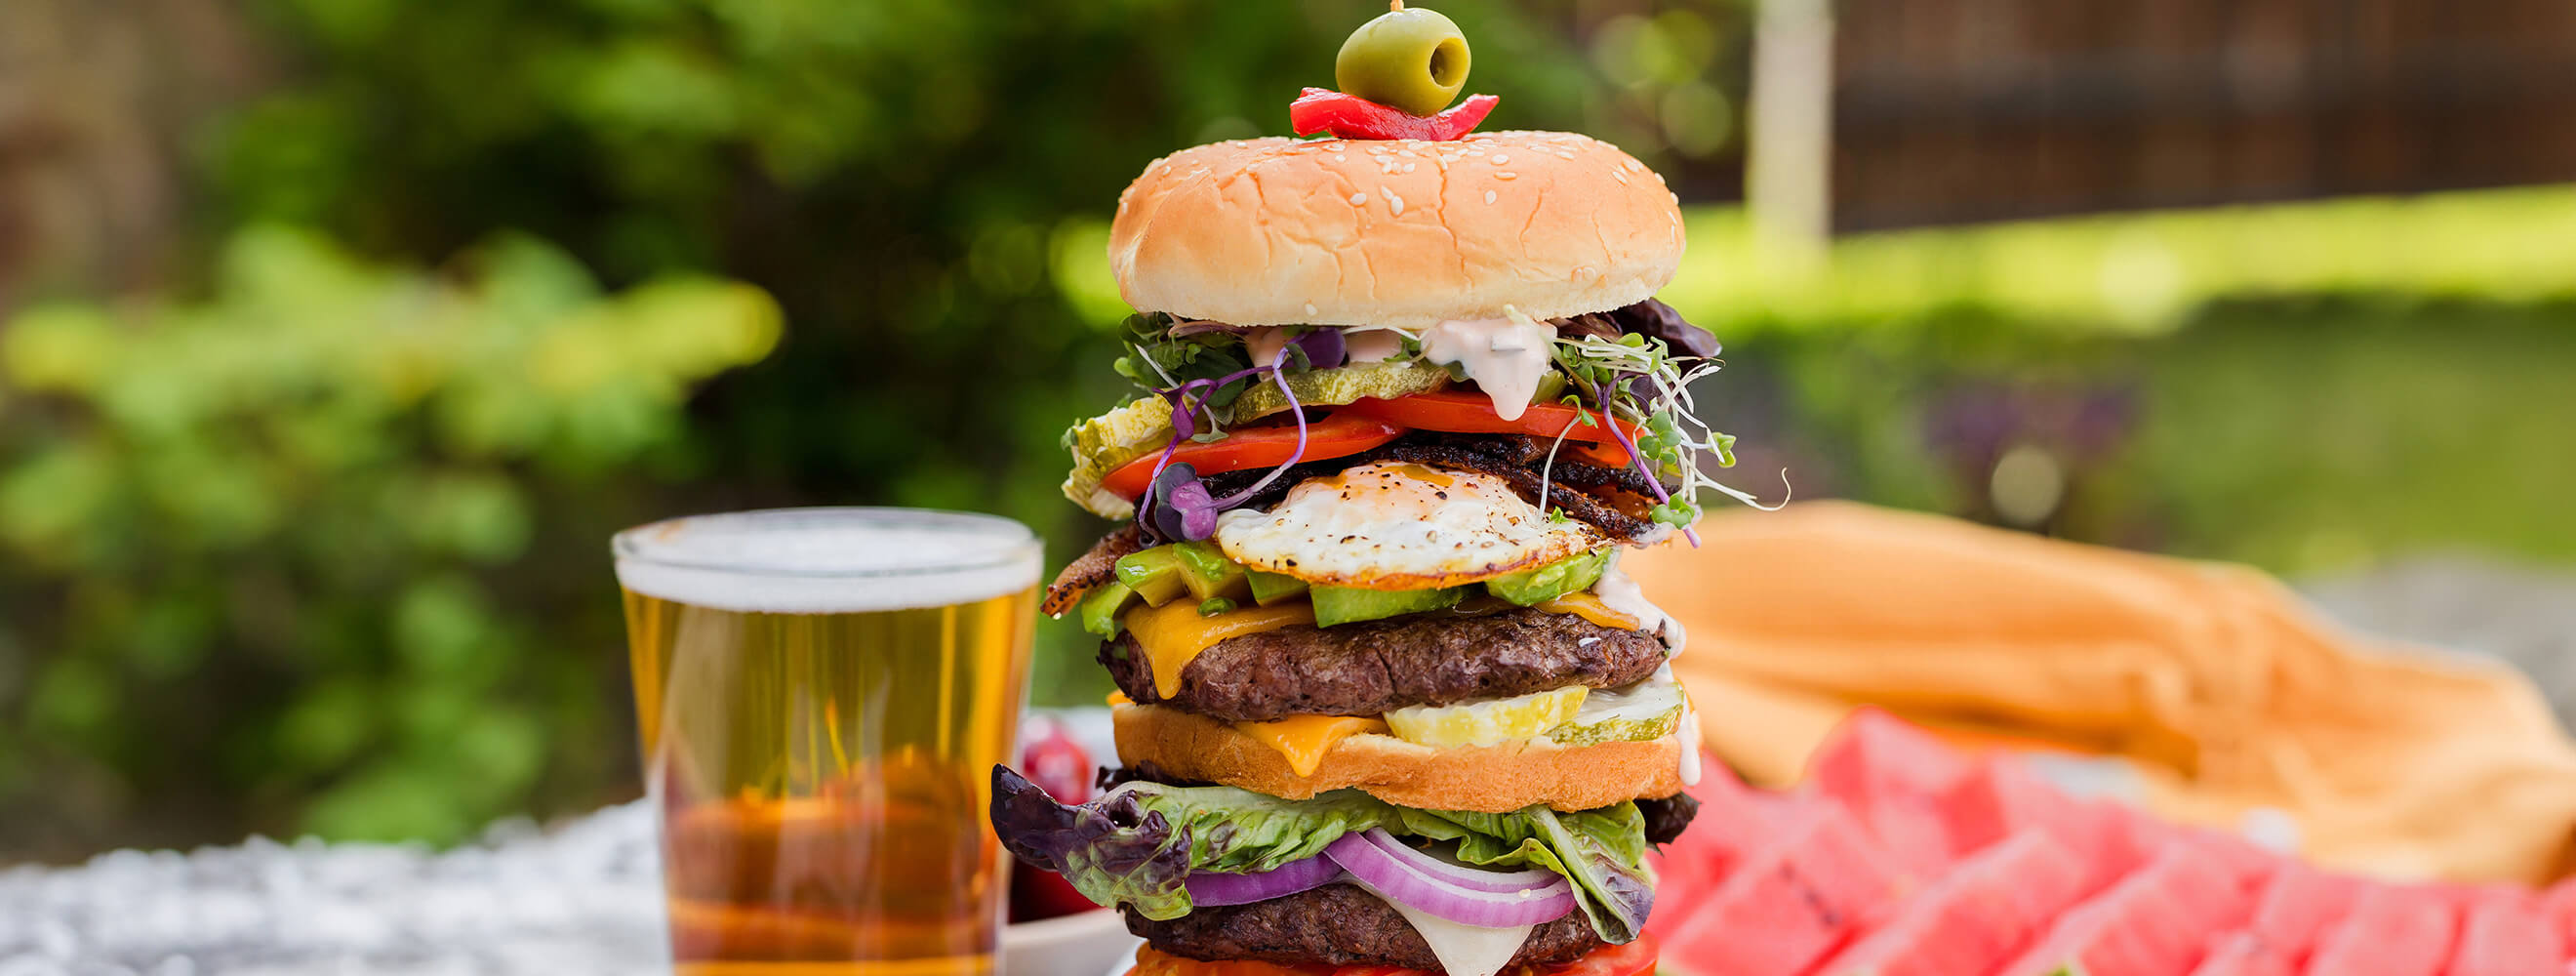 a burger stacked high with layers of meat, cheese, bread and vegetables in a picnic scene.